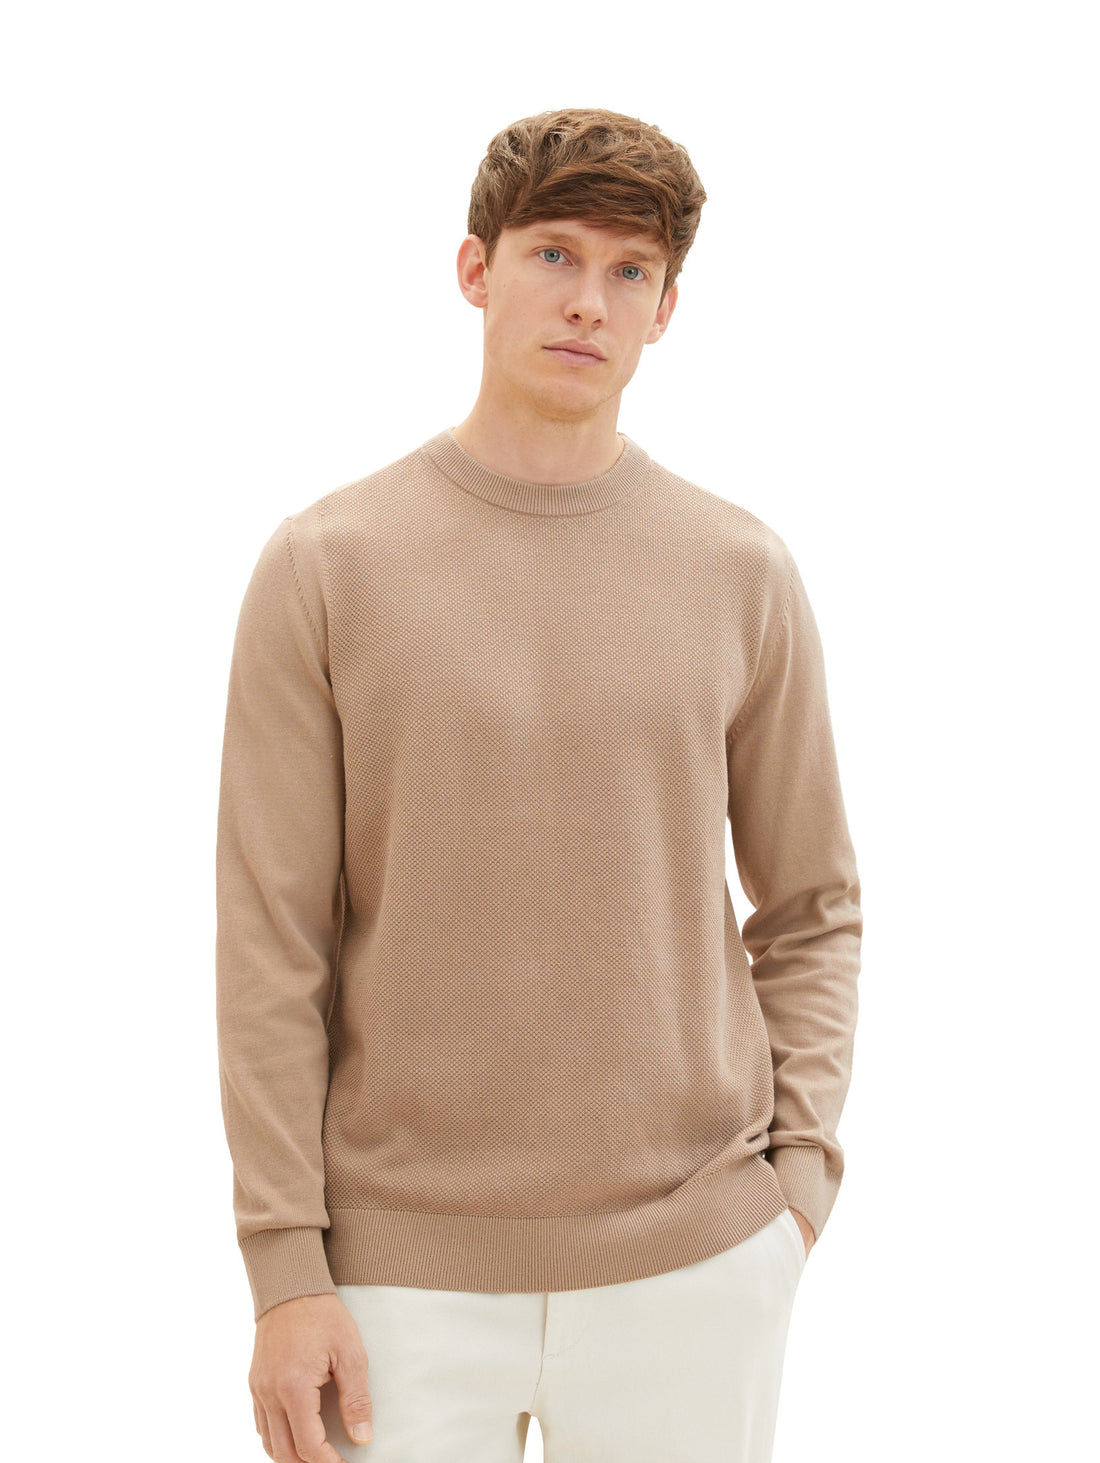 Knitted Pullover With Round Neckline_1038198_10942_02